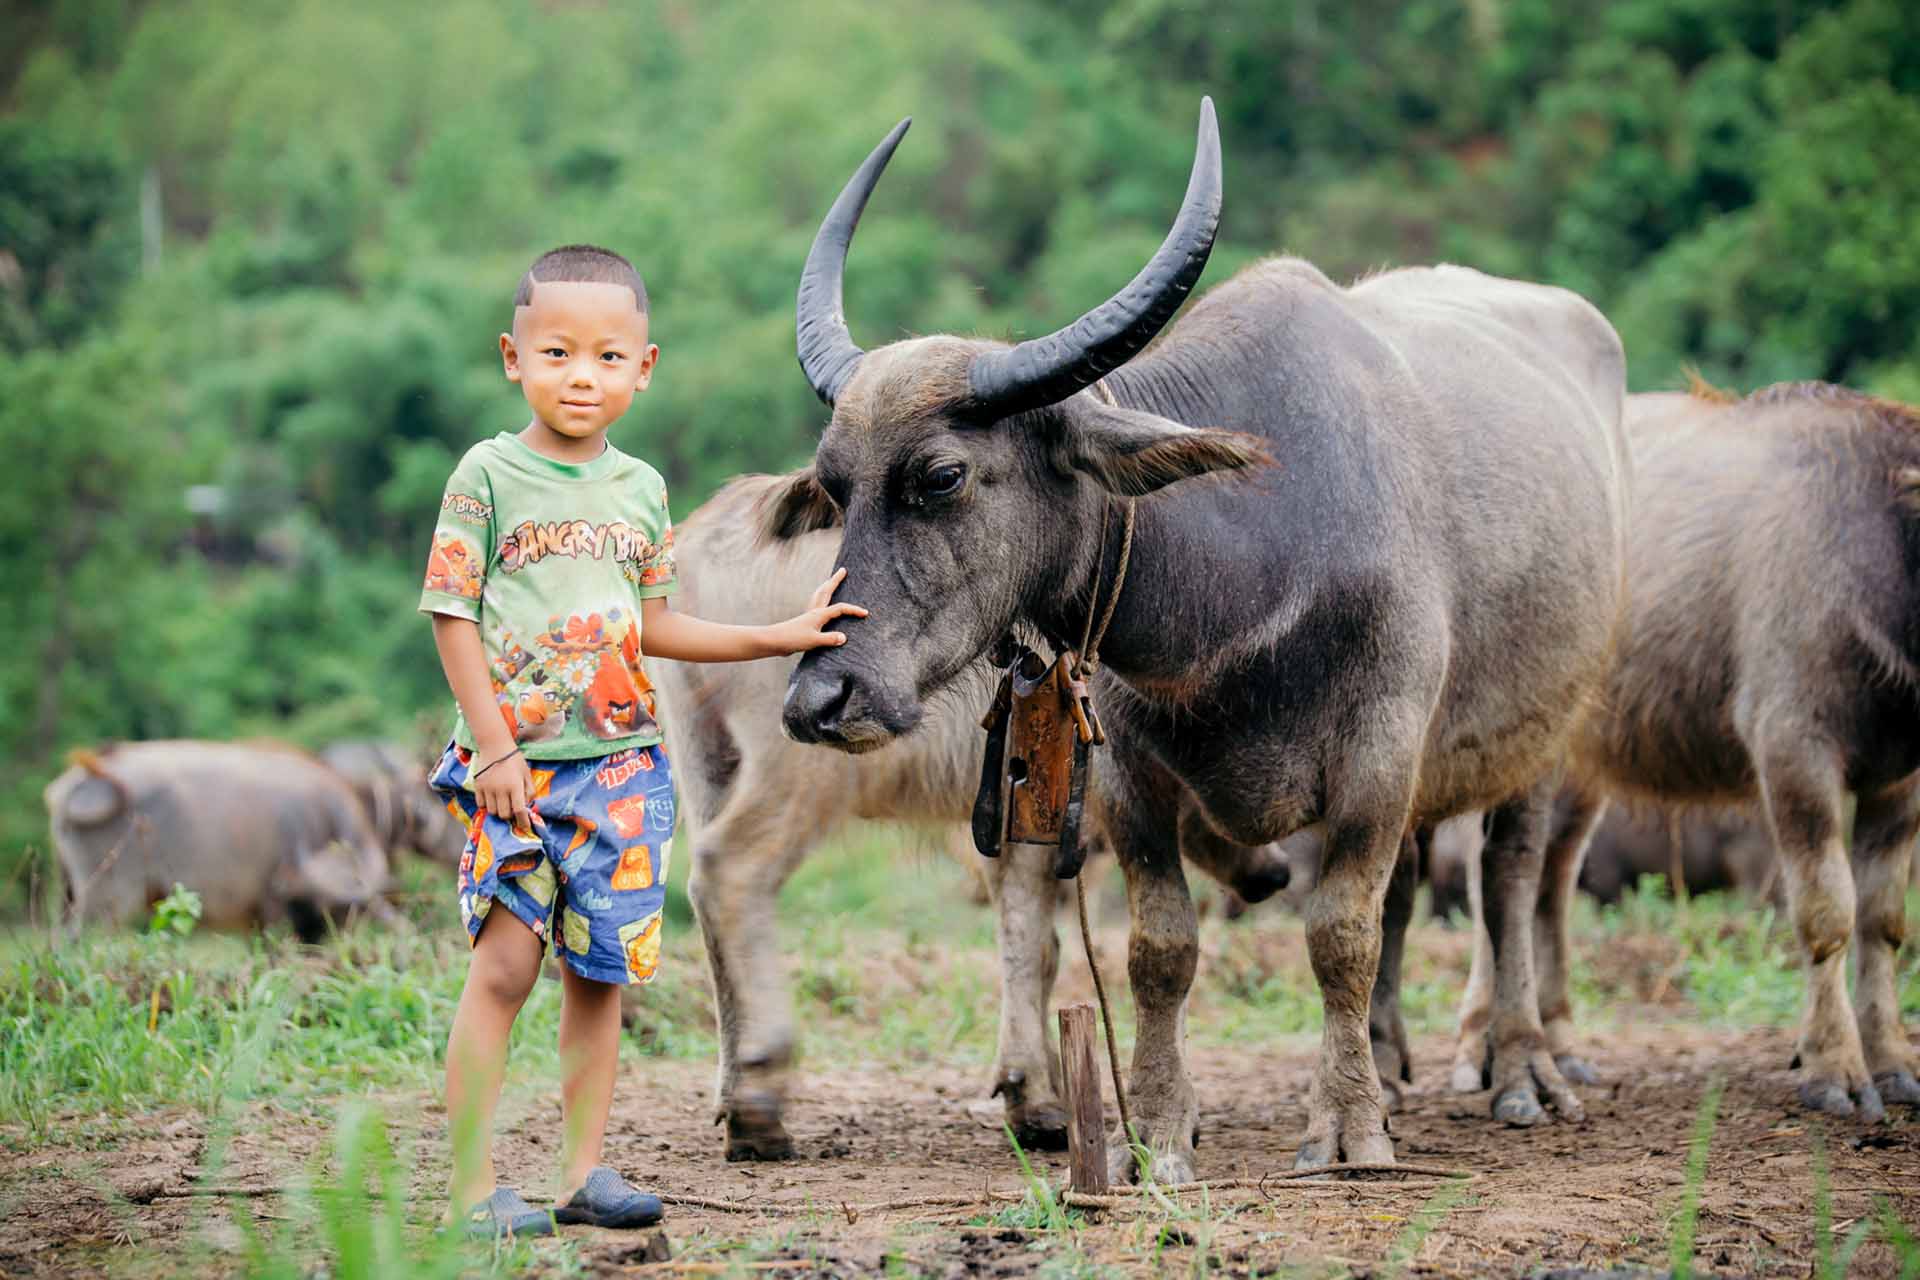 A boy stands with livestock